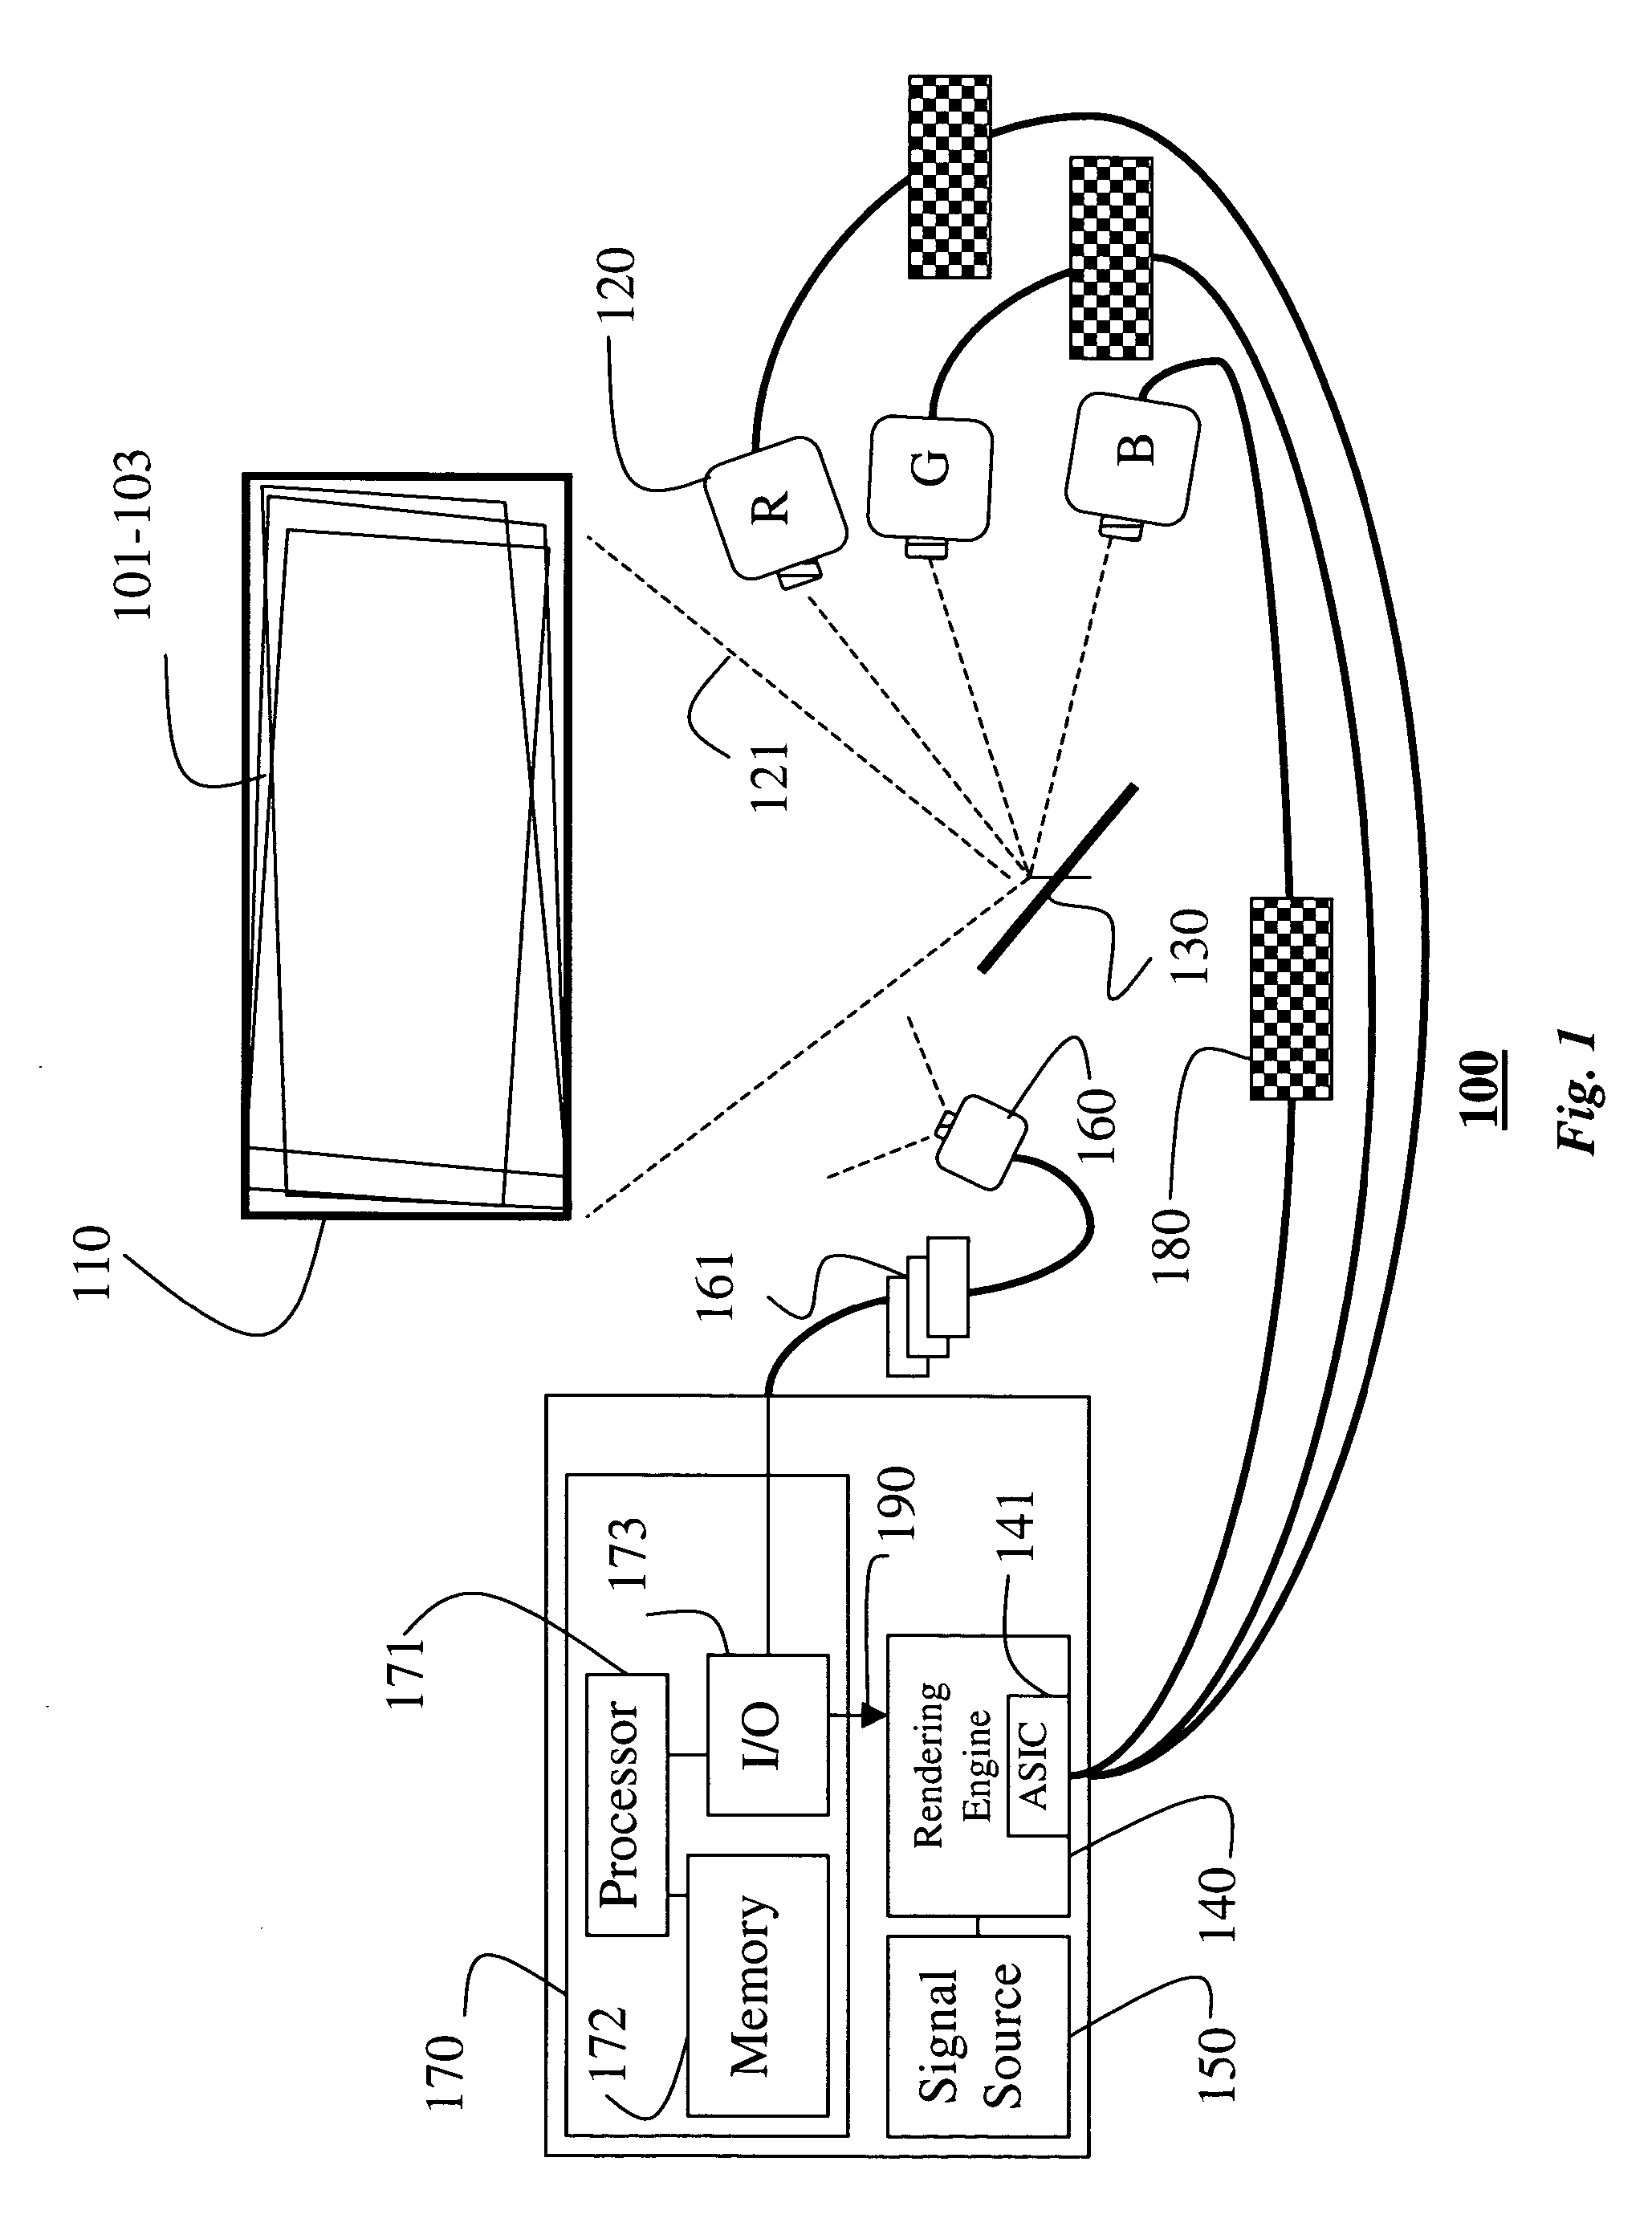 Self-correcting rear projection television